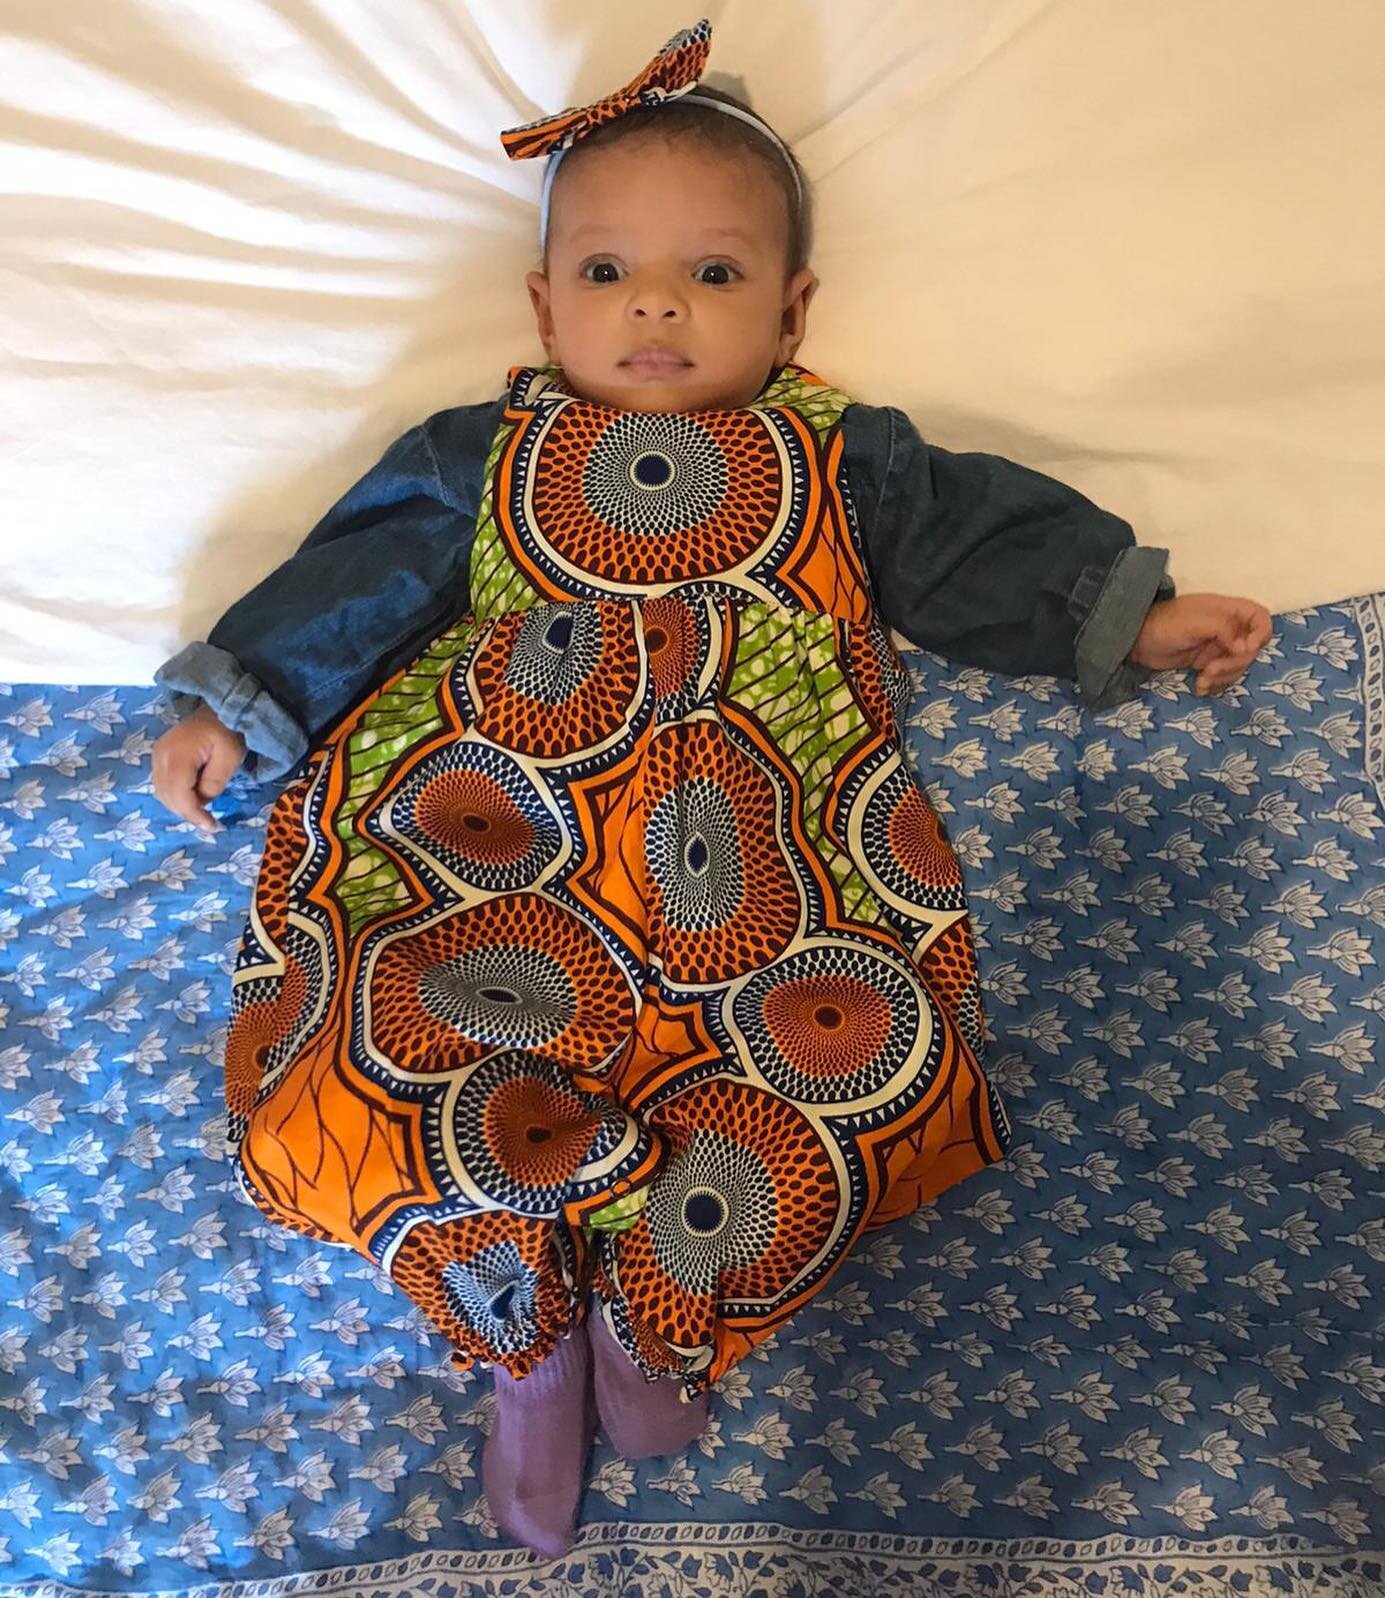 Beautiful Una, hanging out on her Blue Chameli quilt. She is absolute heaven! We have a handful of cot quilts left in stock, all certified organic cotton (with organic padding inside too). Great to think there are no harsh chemicals against their lit